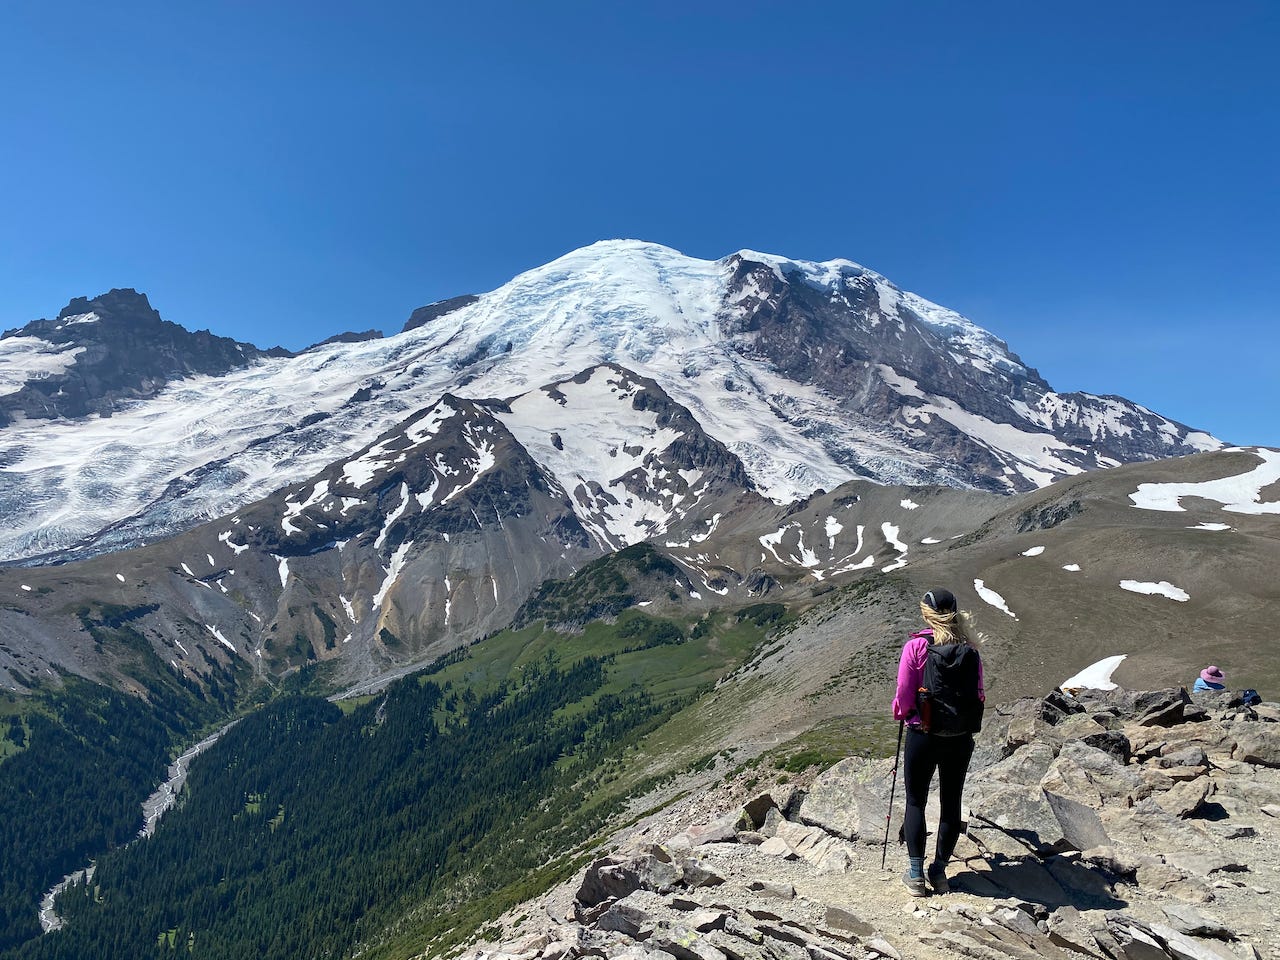 <p><span>Mount Rainier is only a few hours from the Smiths home in Washington, which is convenient since it's one of their favorite parks to visit in the summer. </span></p><p><span>"</span>Mount Rainier isn't quite as popular as some of the others, but Mount Rainier is incredible," Karen said. "It's like you're in Switzerland. It's world-class hiking at Mount Rainier."</p><p>One of their favorite spots in the park is the Sunrise area, which they say is accessible by car from July 1. "Mount Rainier is literally in your face," Karen added. </p>